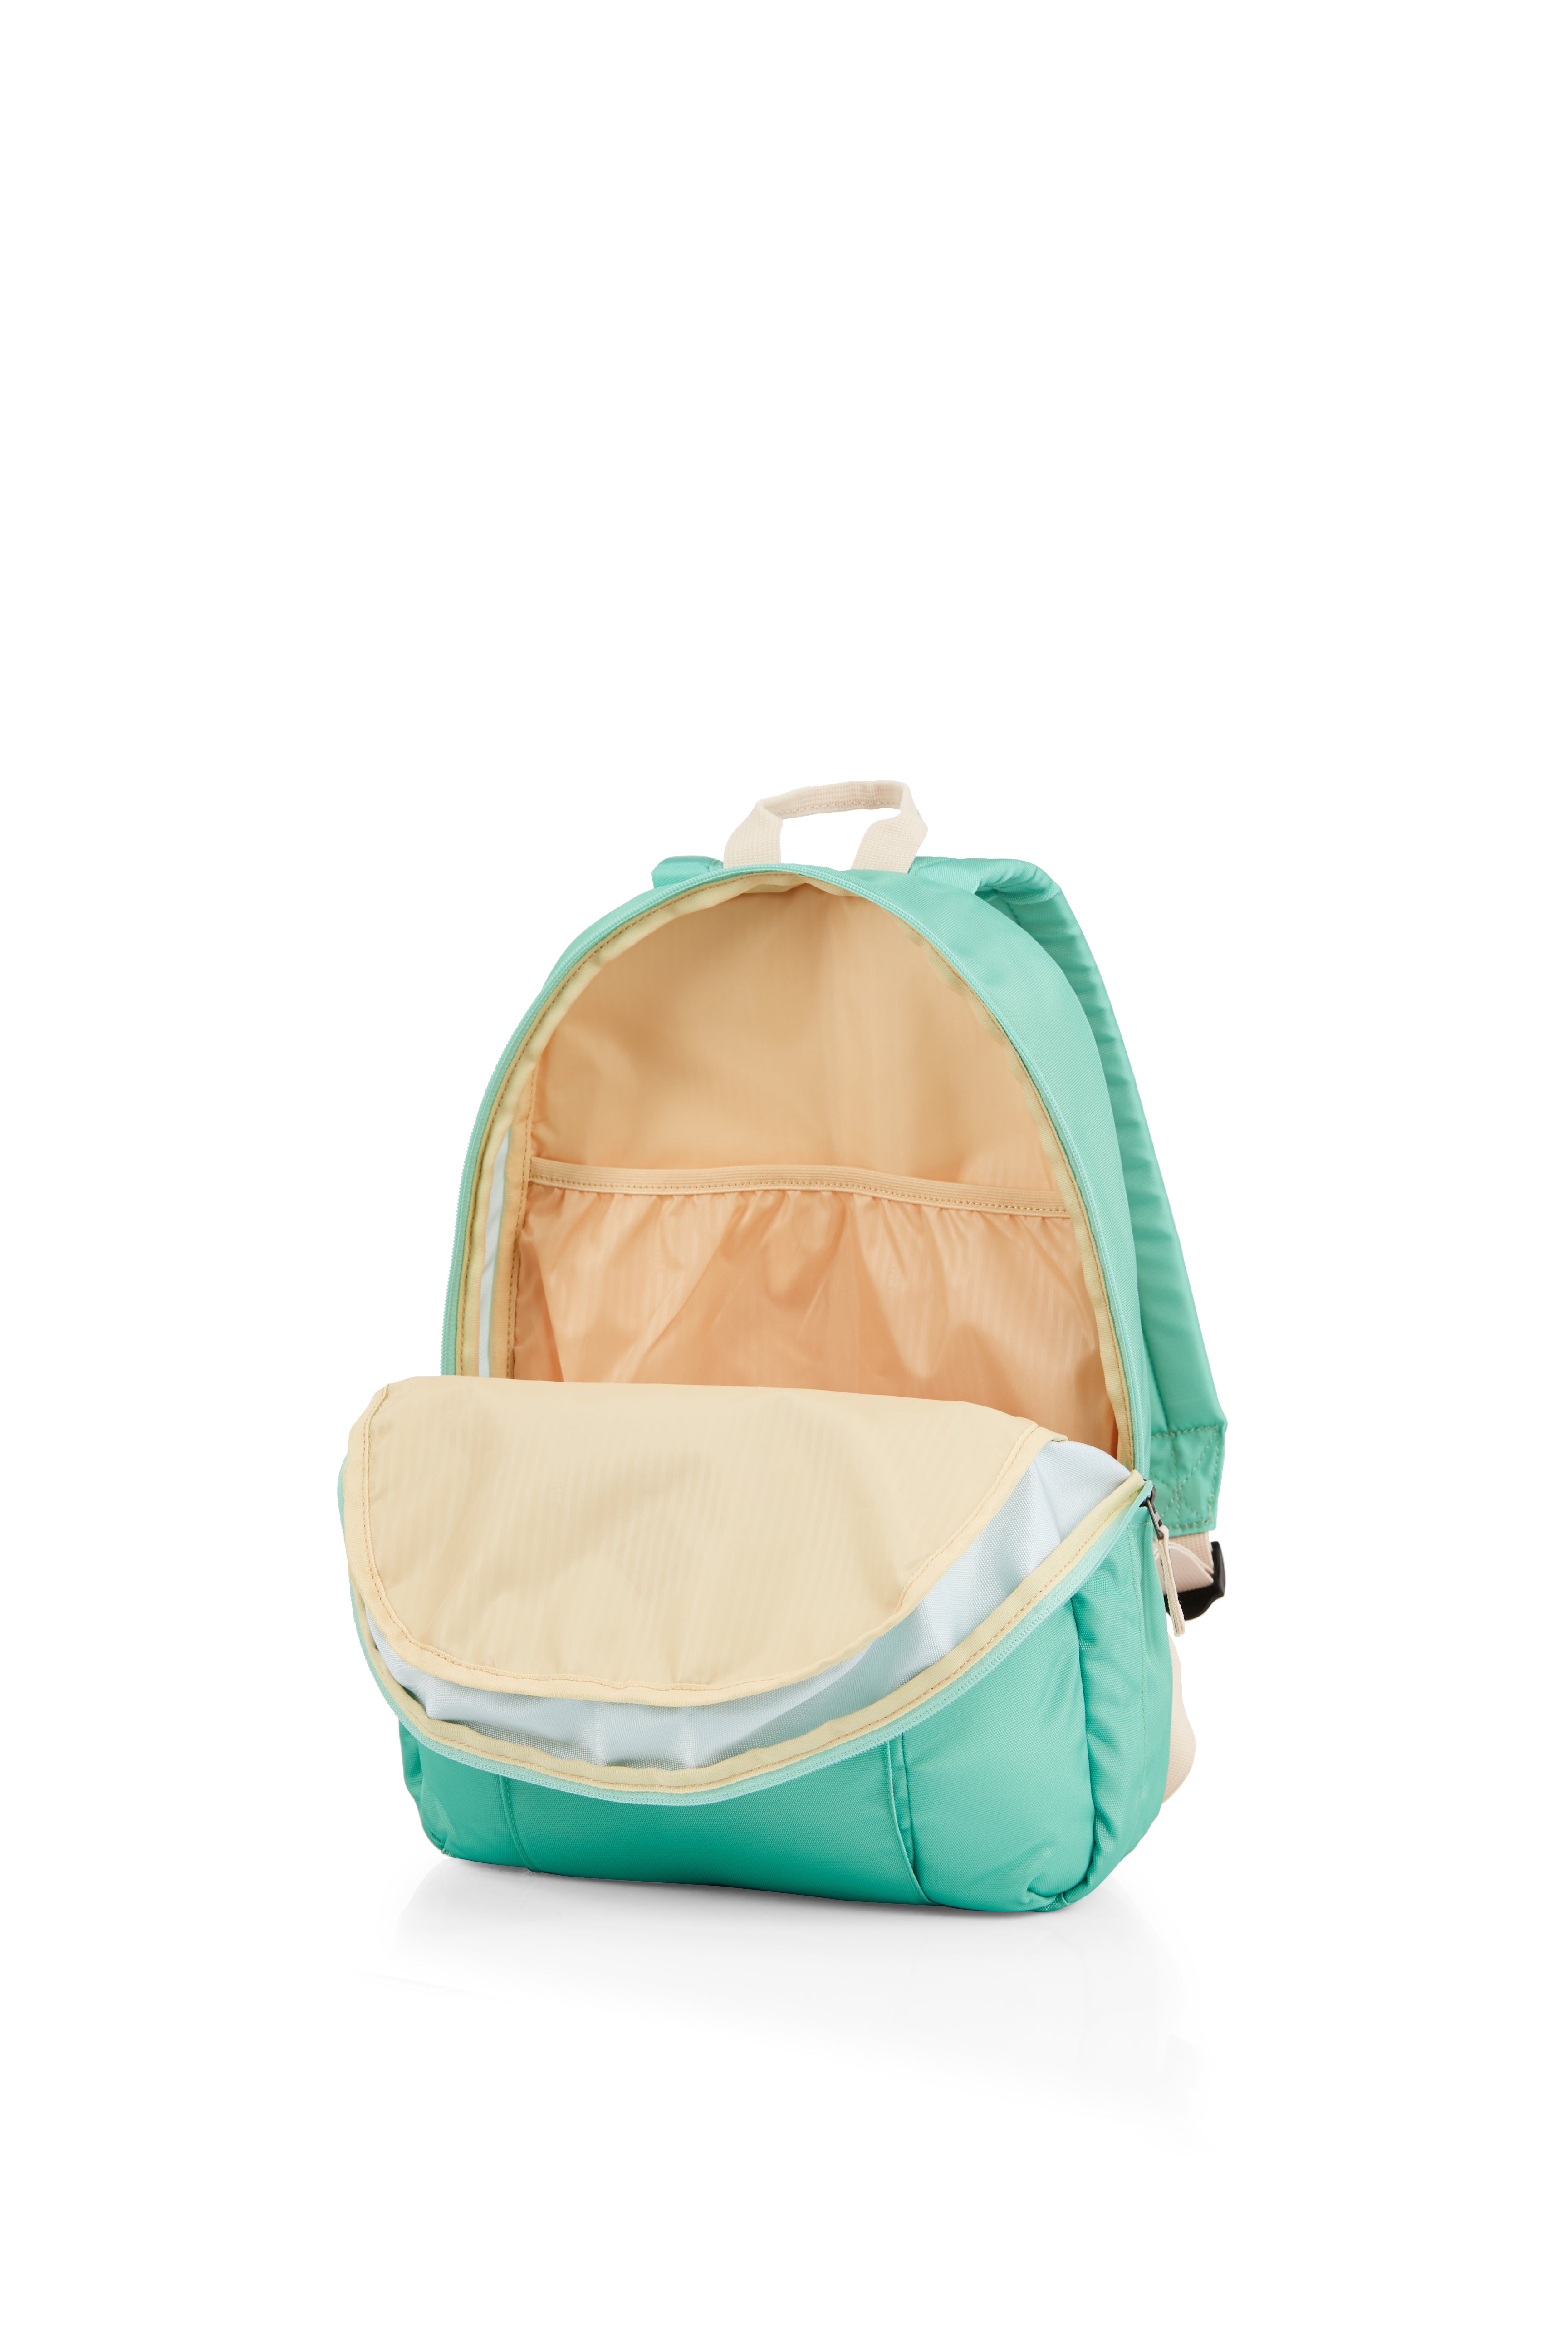 American Tourister - RUDY Small Fashion Backpack - Ice Mint-6